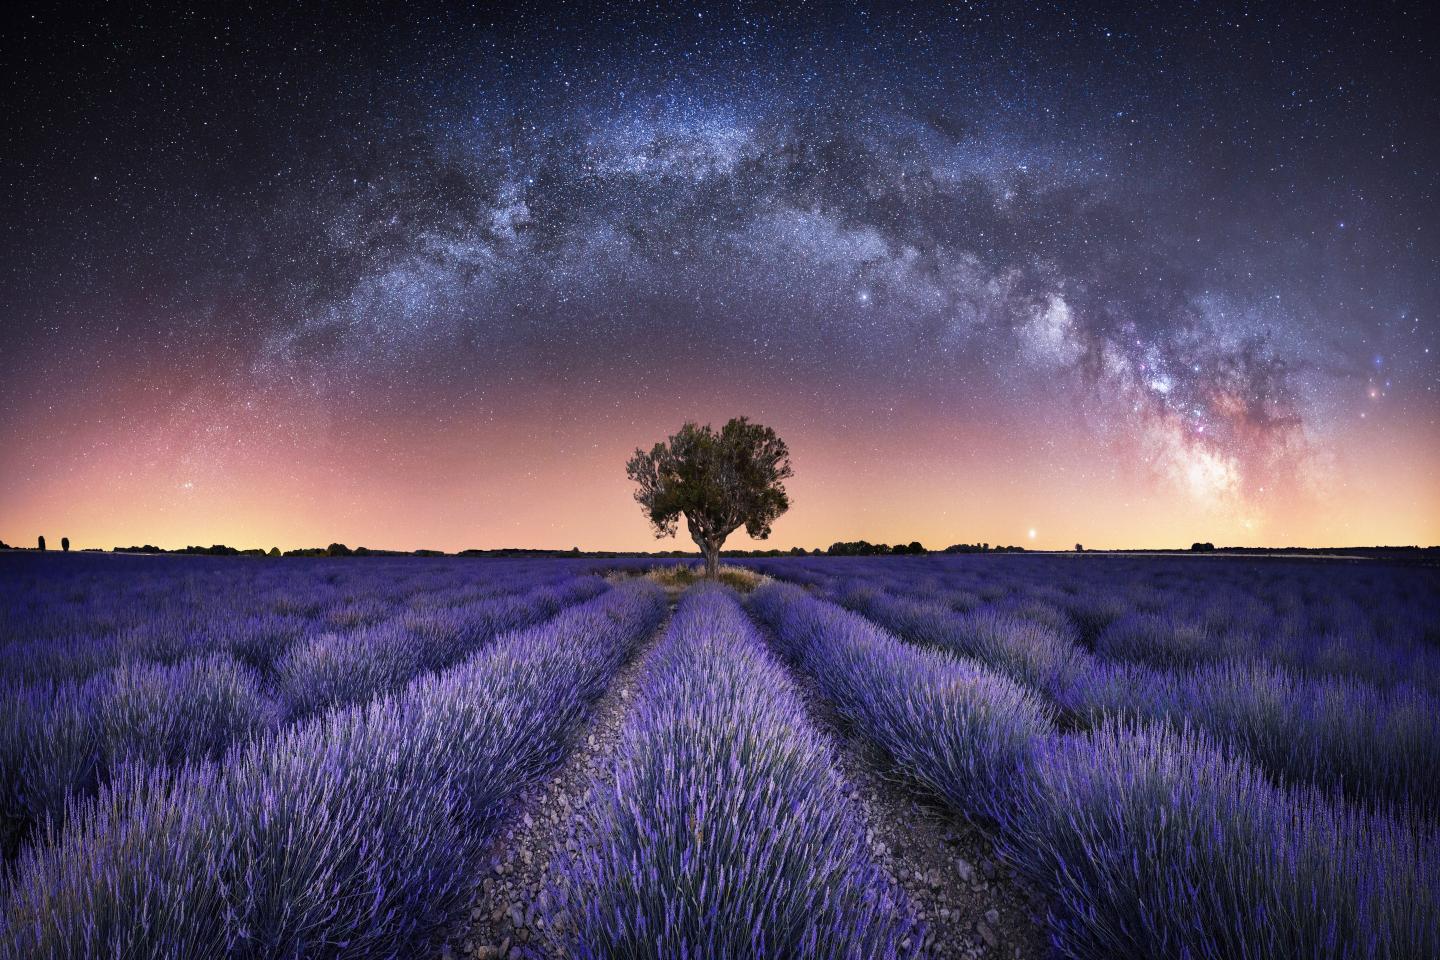 Milky Way stretching over lavender fields in France